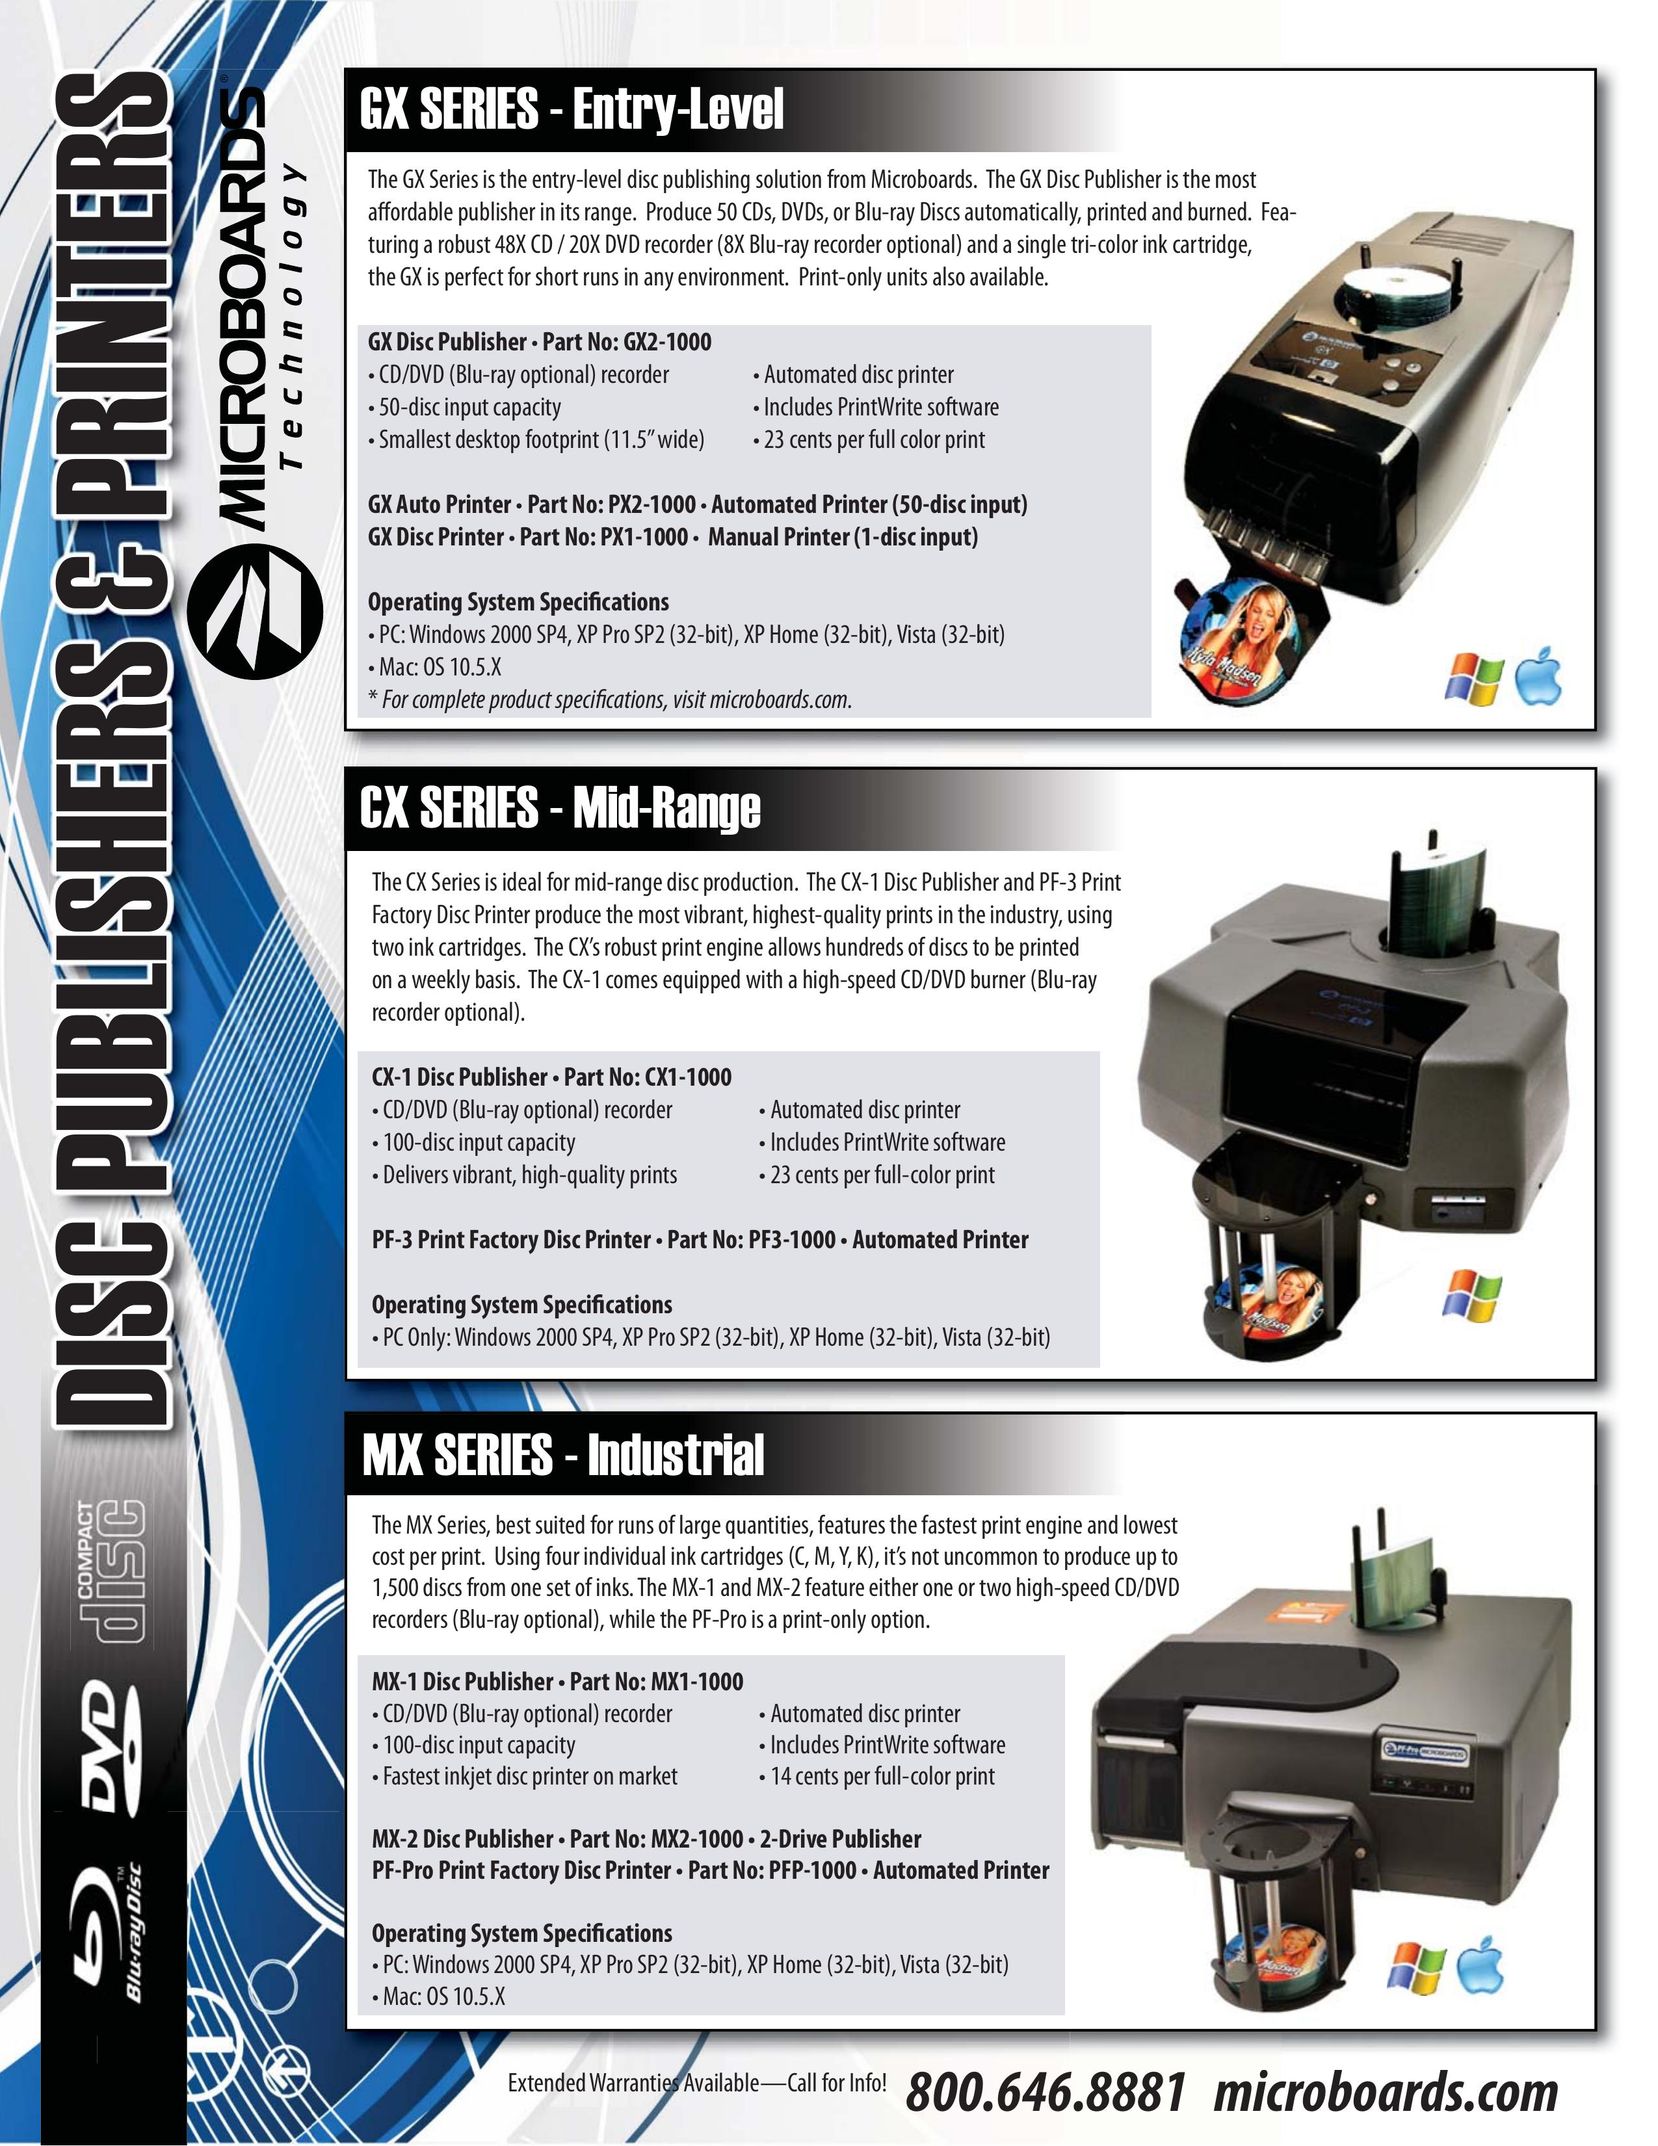 MicroBoards Technology PX1-1000 Printer User Manual